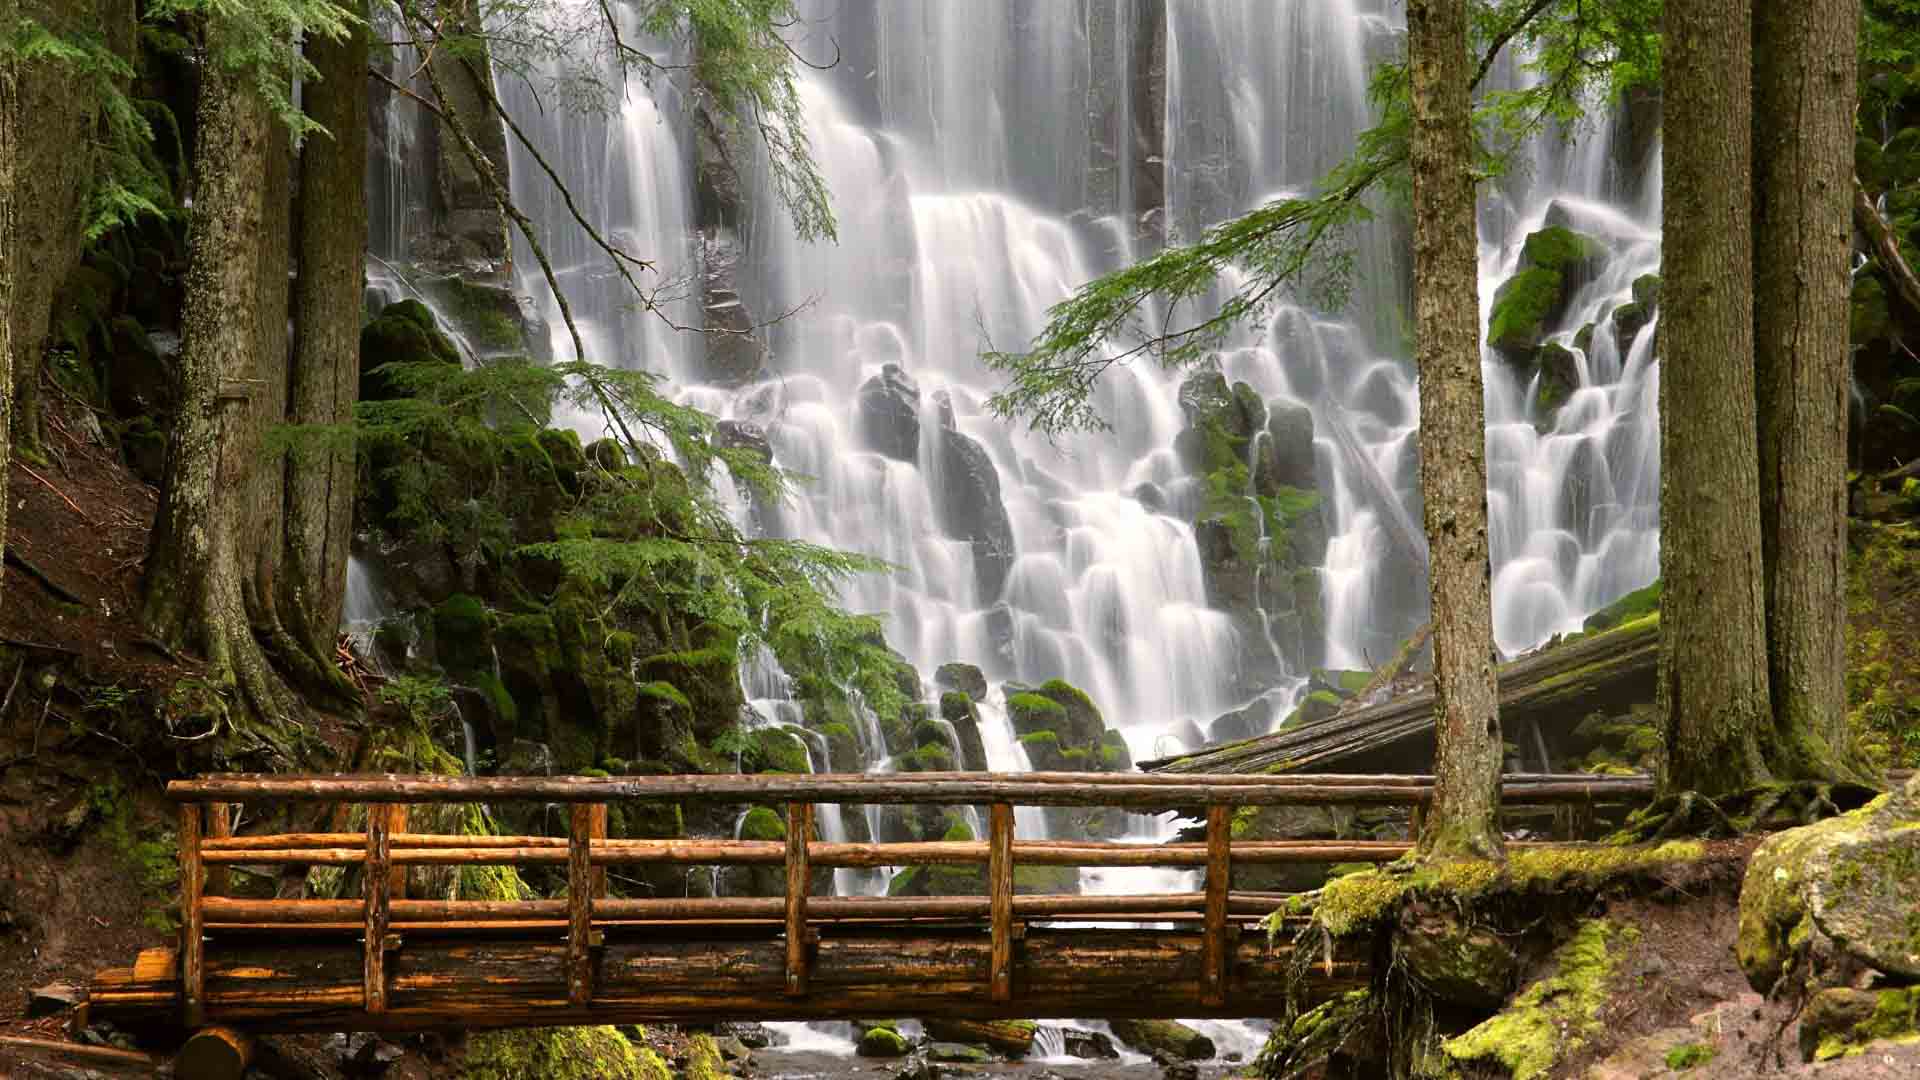 hd wallpapers free download,waterfall,natural landscape,nature,body of water,nature reserve